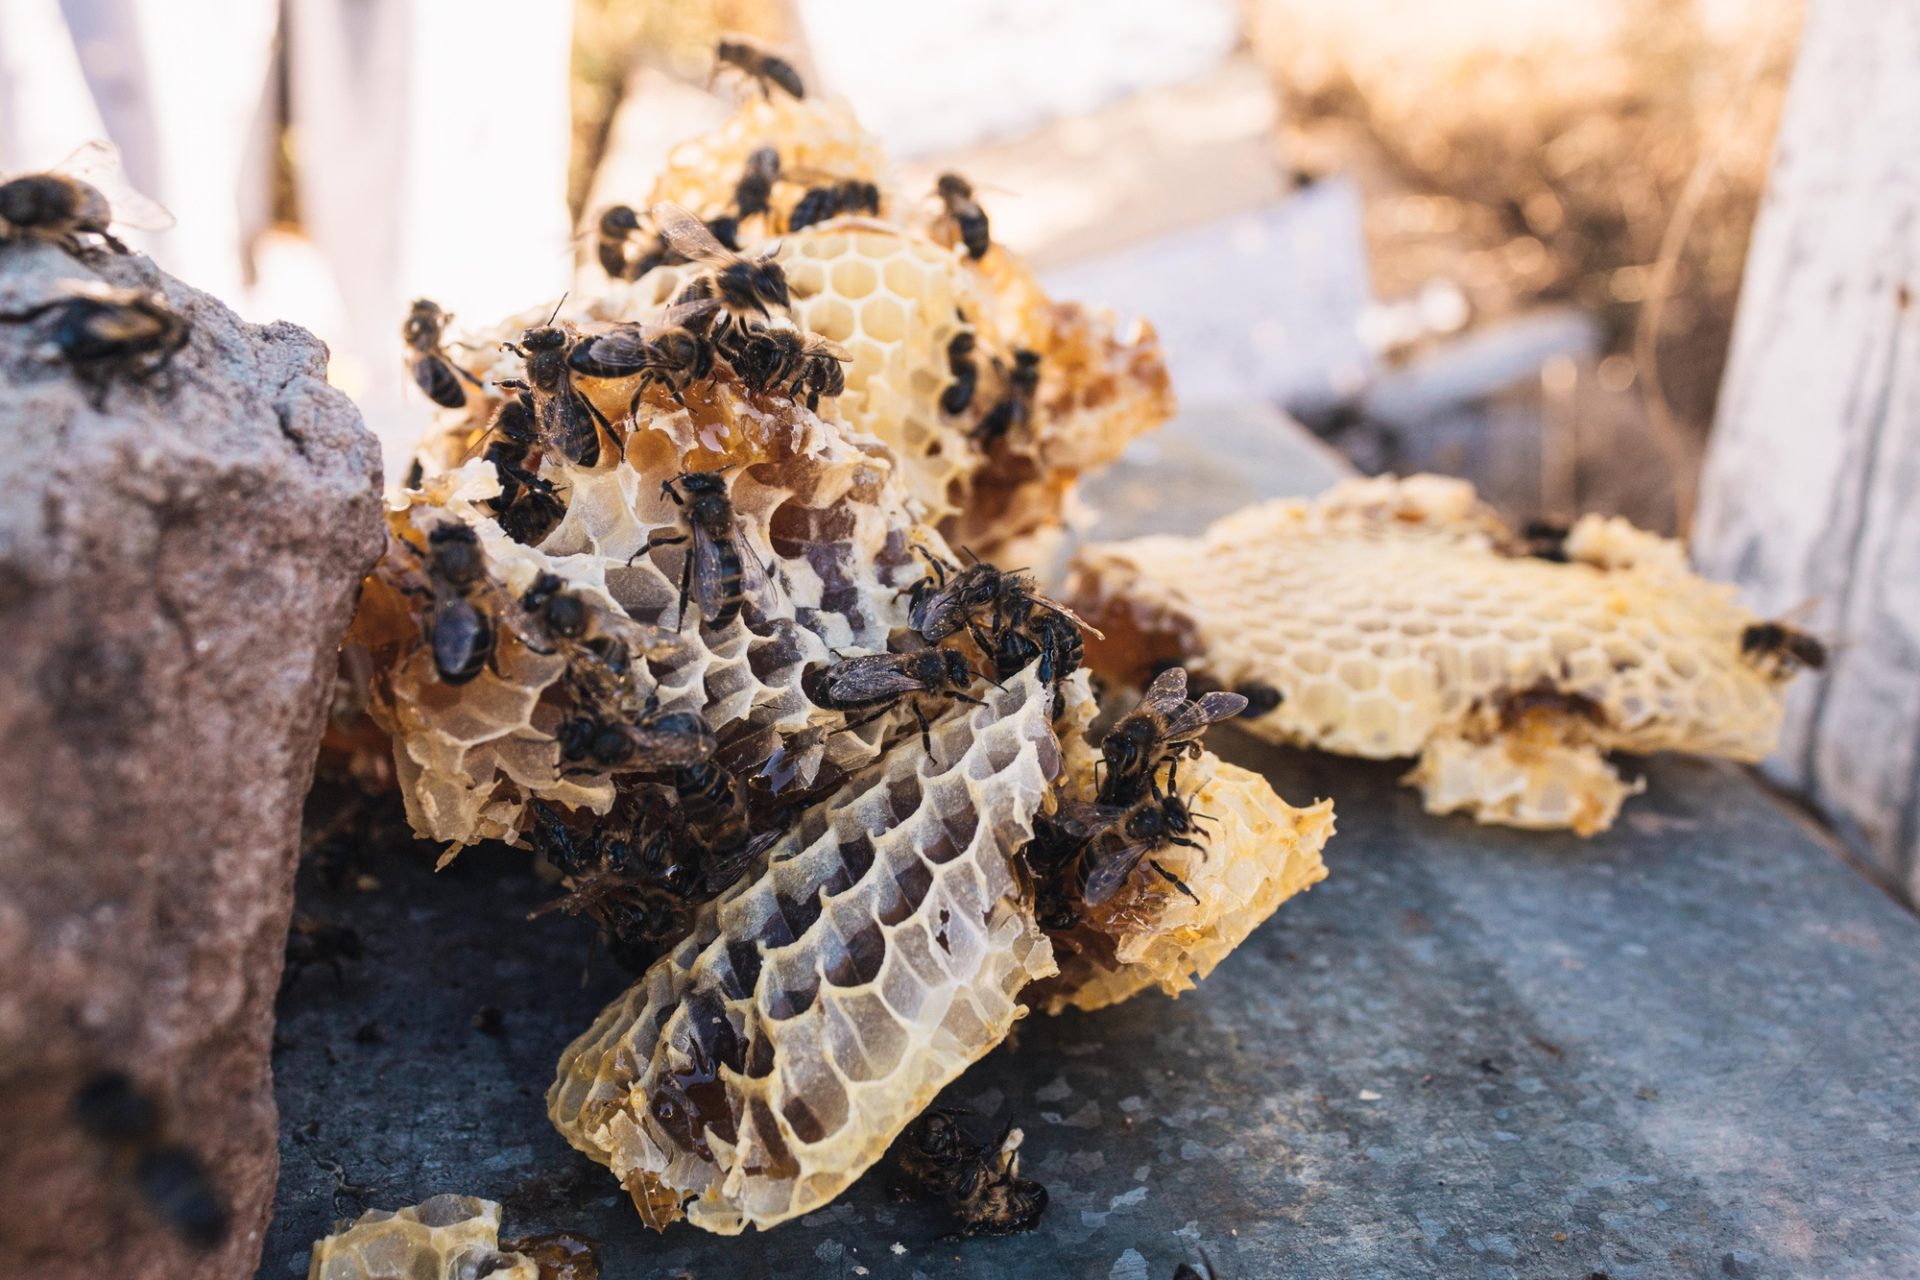 Bees on Honeycomb - Honeybees' Natural Defenses Against Threats